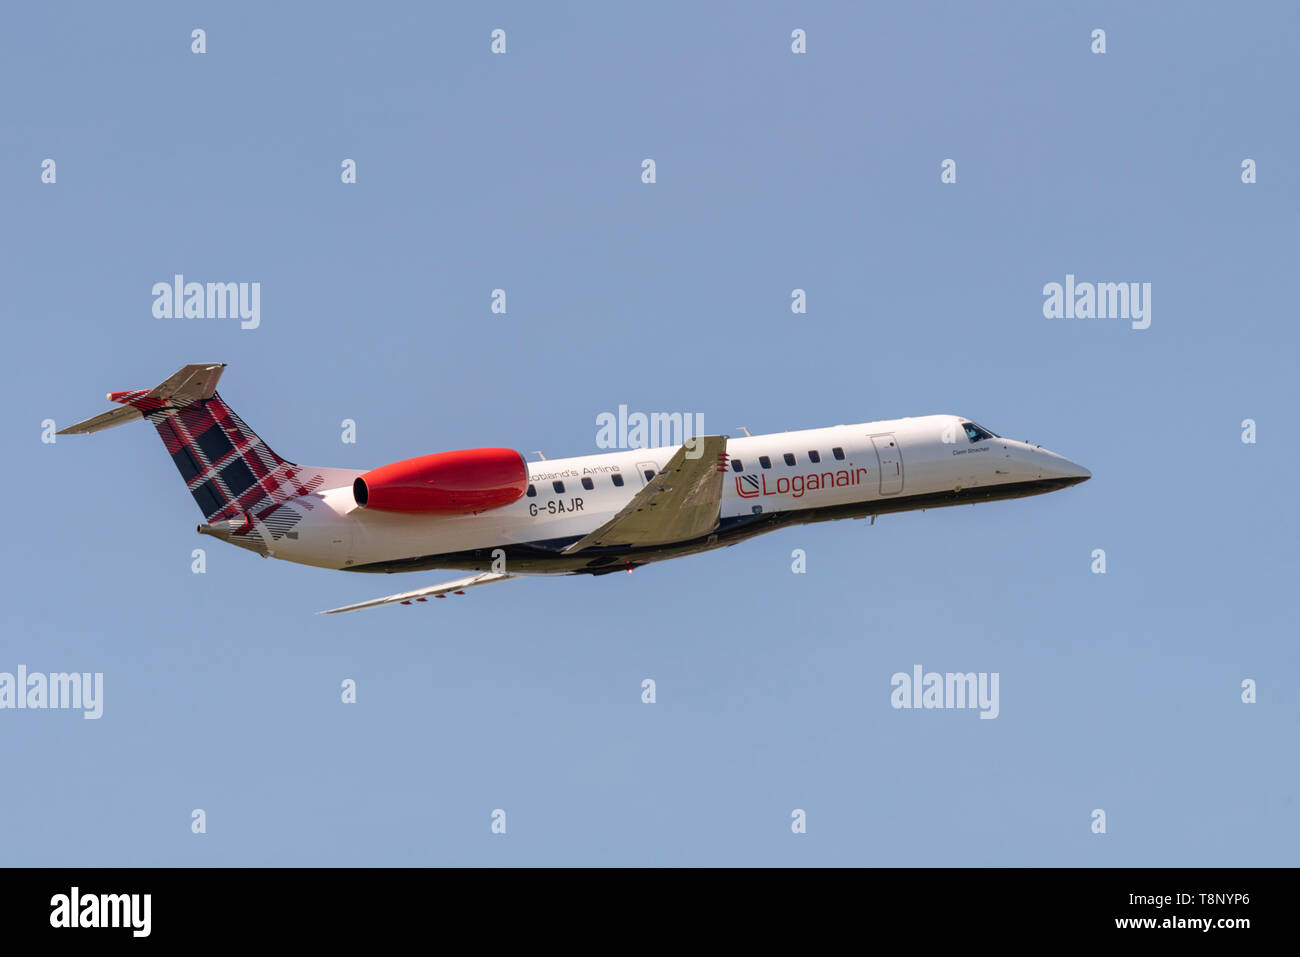 Loganair Embraer ERJ135 climbing out after take off at London Southend Airport, Essex, UK. Climb out. Flying away Stock Photo